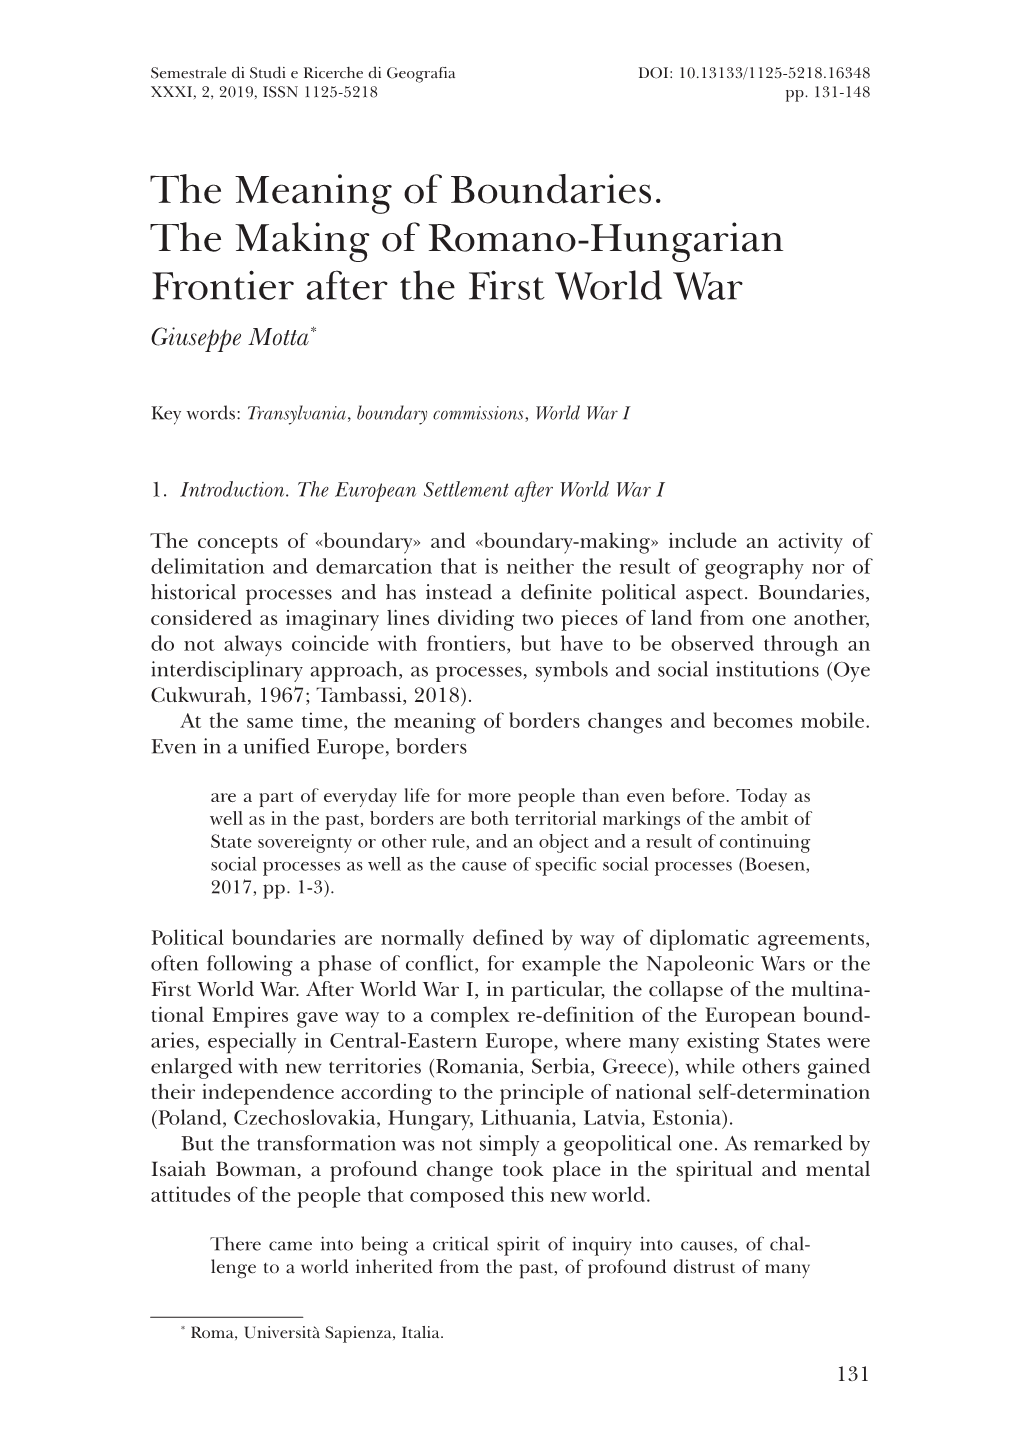 The Meaning of Boundaries. the Making of Romano-Hungarian Frontier After the First World War Giuseppe Motta*